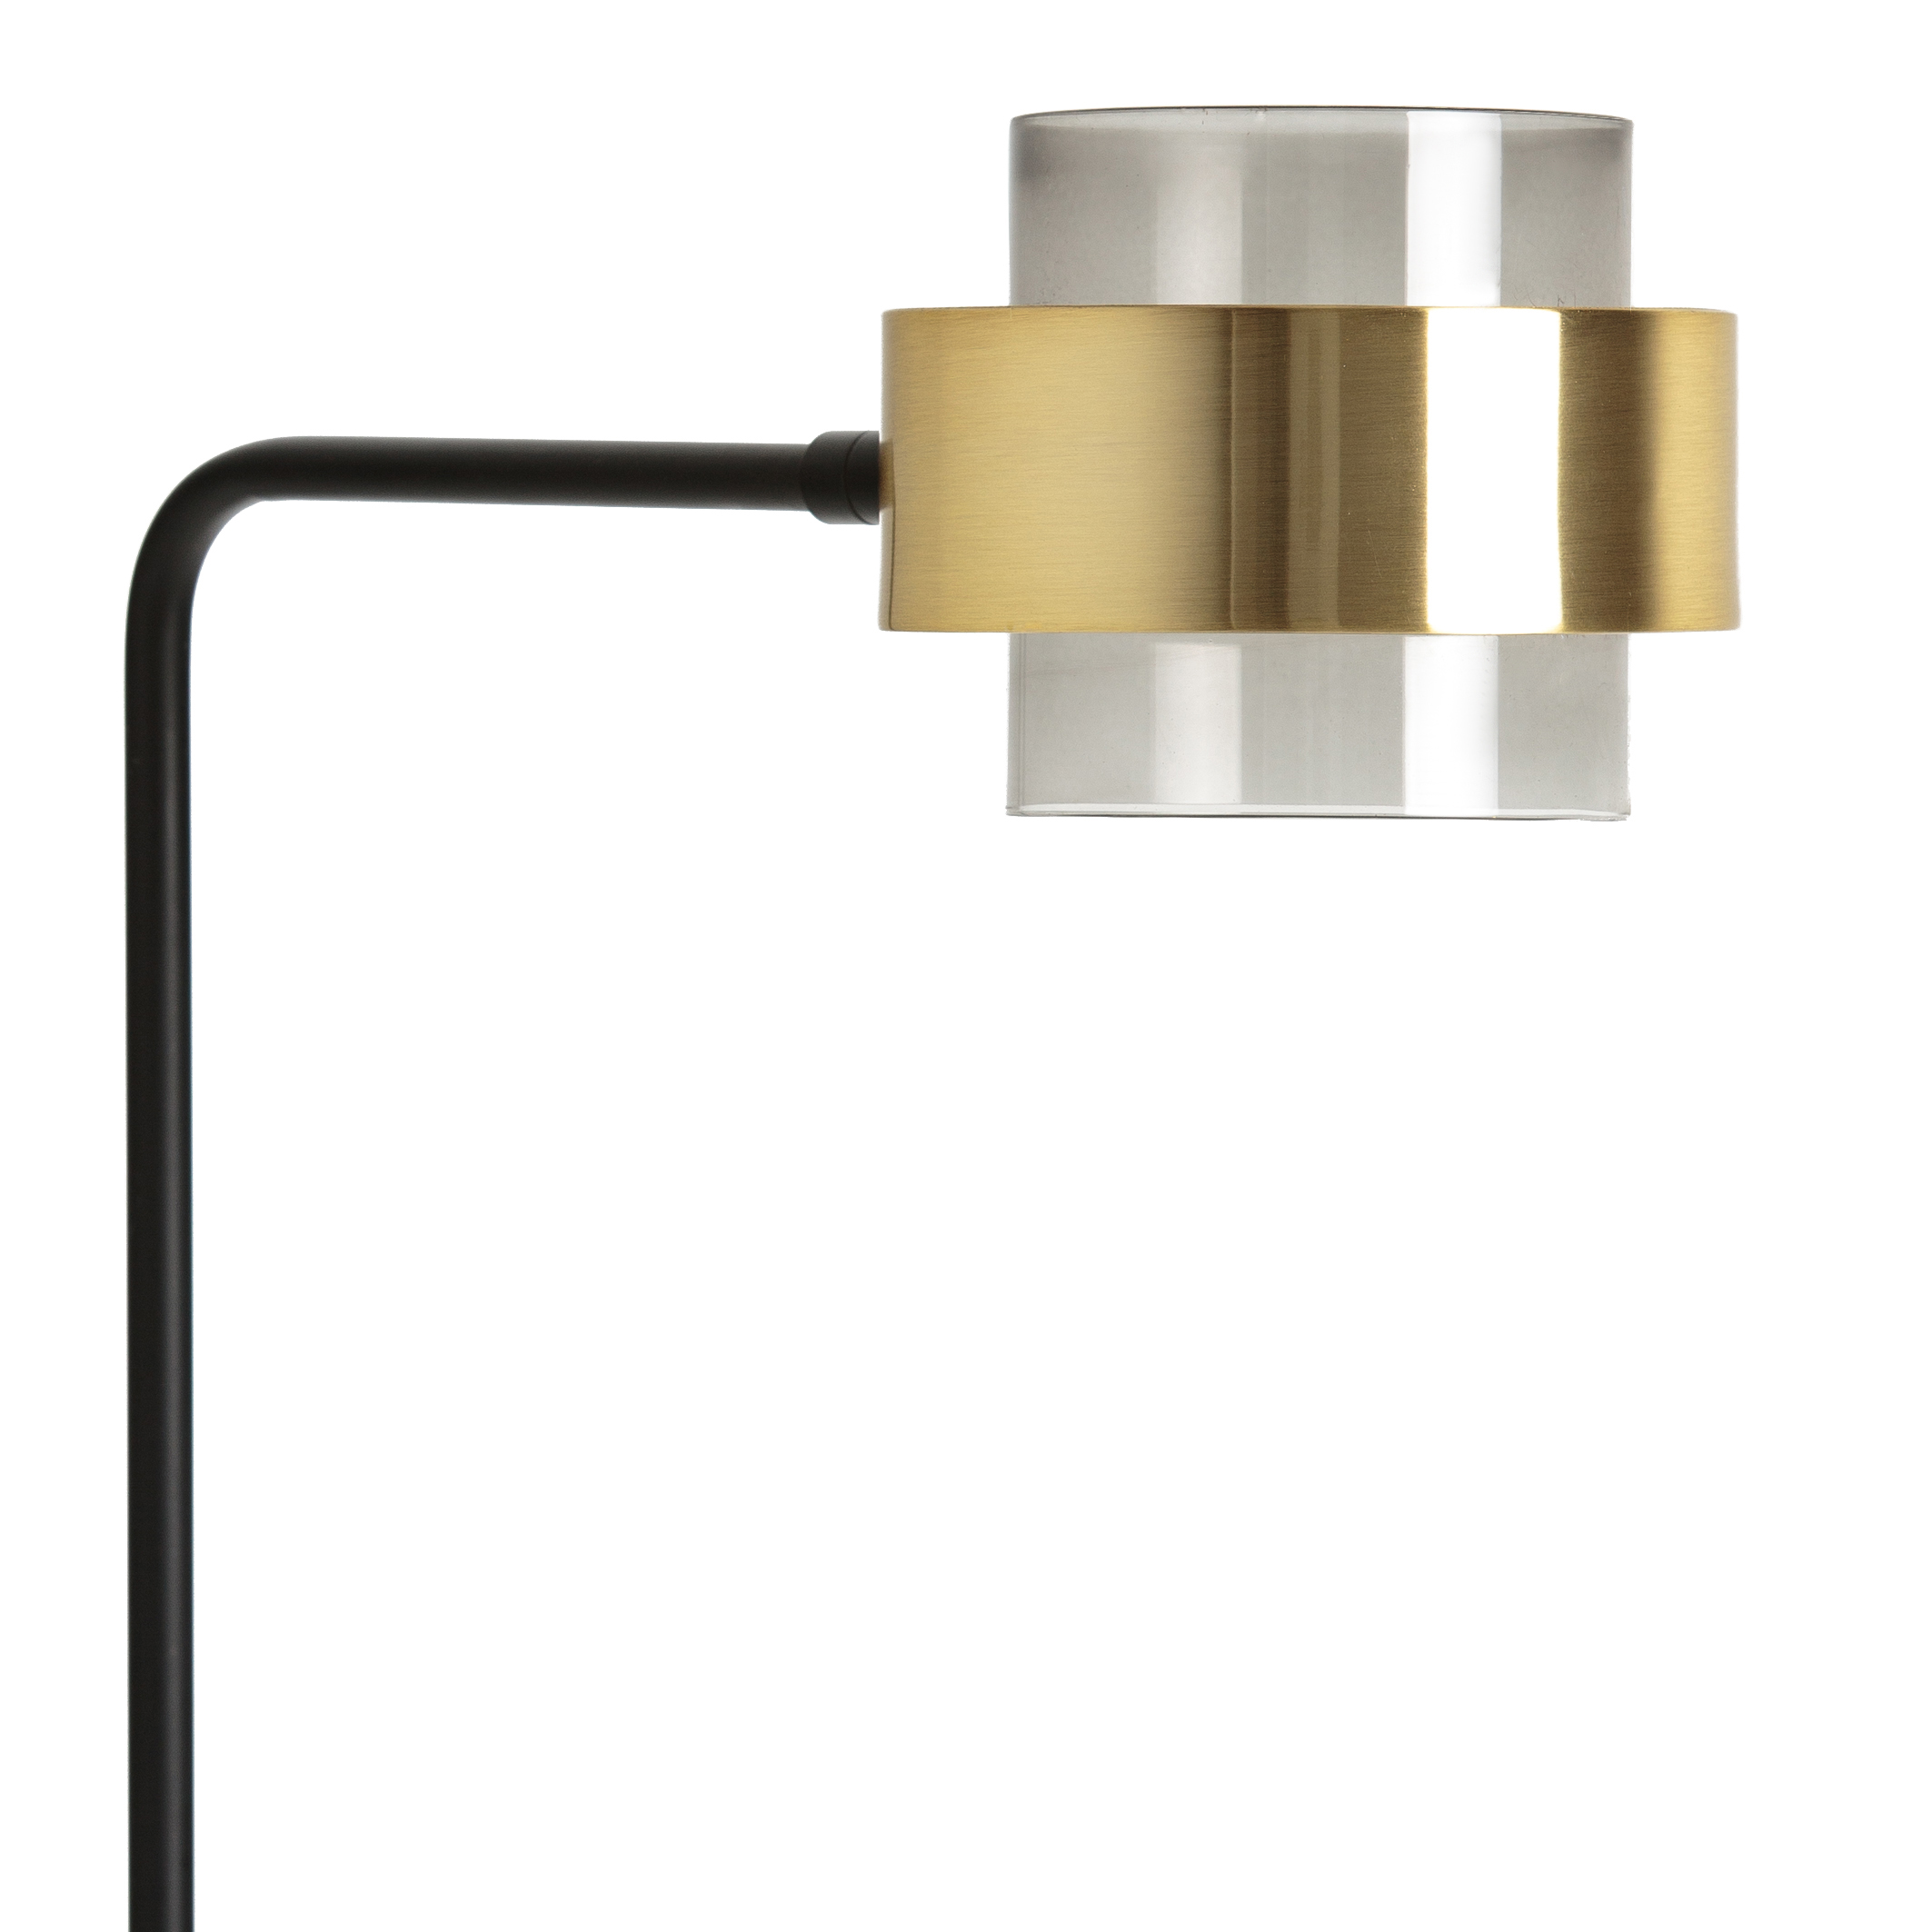 Interieurs floor adjustable La metal | glass La arms black/brass Redoute with Redoute lamp reading Botello &